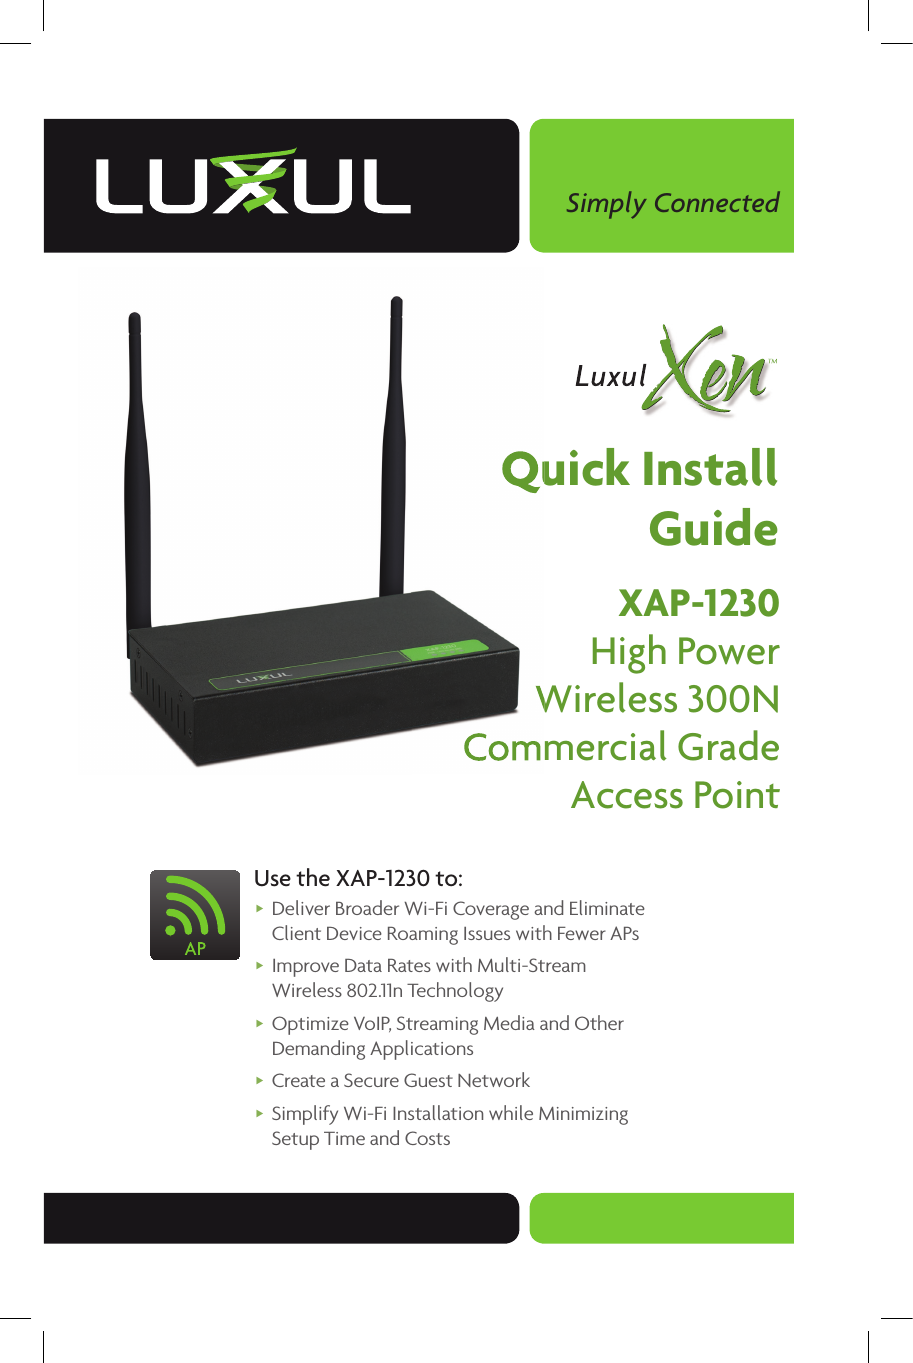 Simply ConnectedQuick InstallGuideXAP-1230High PowerWireless 300NCommercial GradeAccess Point Use the XAP-1230 to: Deliver Broader Wi-Fi Coverage and Eliminate Client Device Roaming Issues with Fewer APs      Improve Data Rates with Multi-Stream Wireless 802.11n Technology Optimize VoIP, Streaming Media and Other Demanding Applications Create a Secure Guest Network Simplify Wi-Fi Installation while Minimizing Setup Time and CostsQuick InstallQuick InstallWireless 300NWireless 300NCommercial GradeCommercial Grade